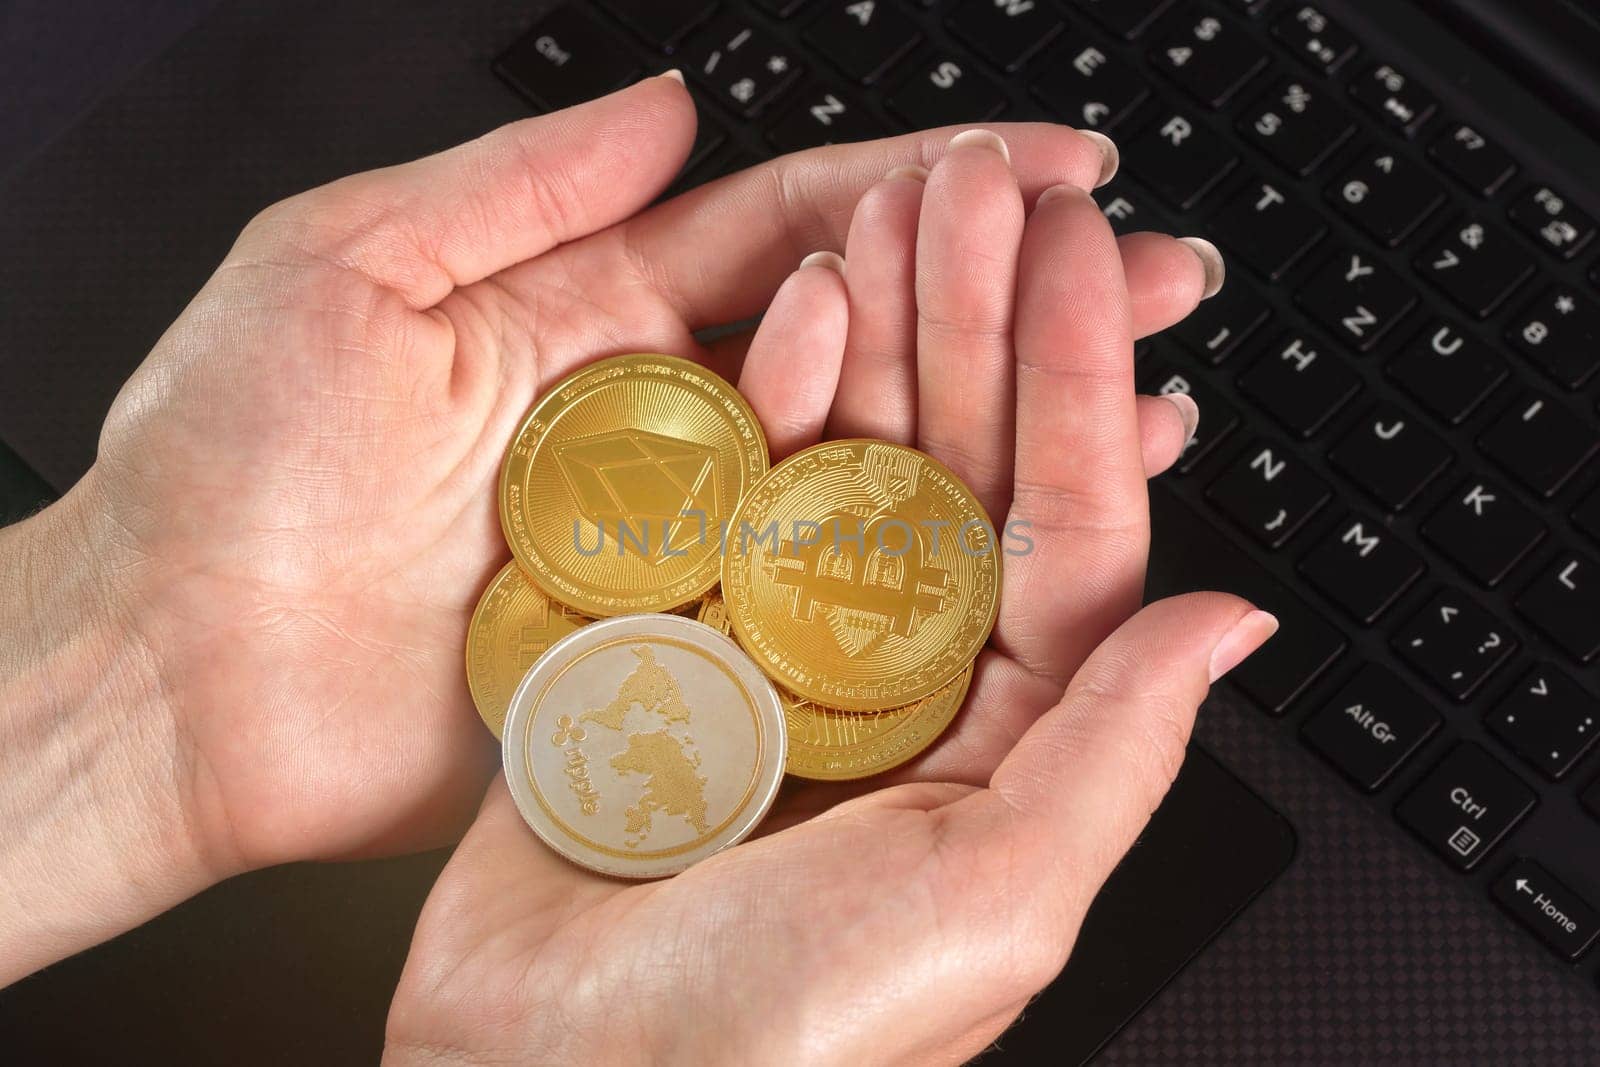 Woman hands holding golden coloured bitcoin, ripple and ethereum cryptocurrency coins over black laptop keyboard